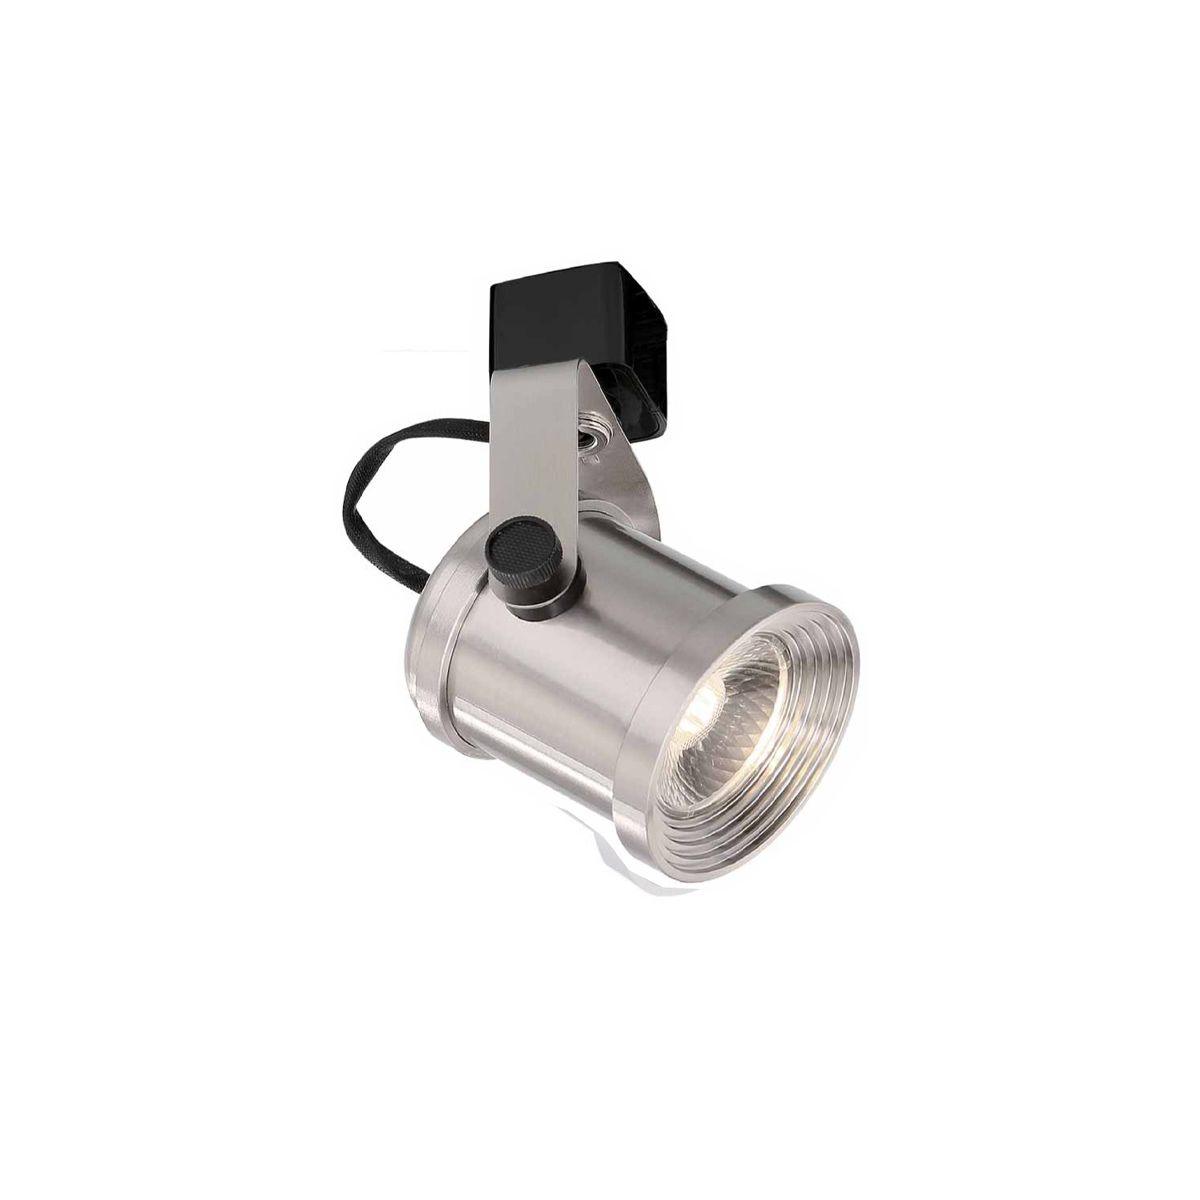 LED Forged Track Head, 12W, 1020 Lumens, 3000K, Halo (H) - Bees Lighting